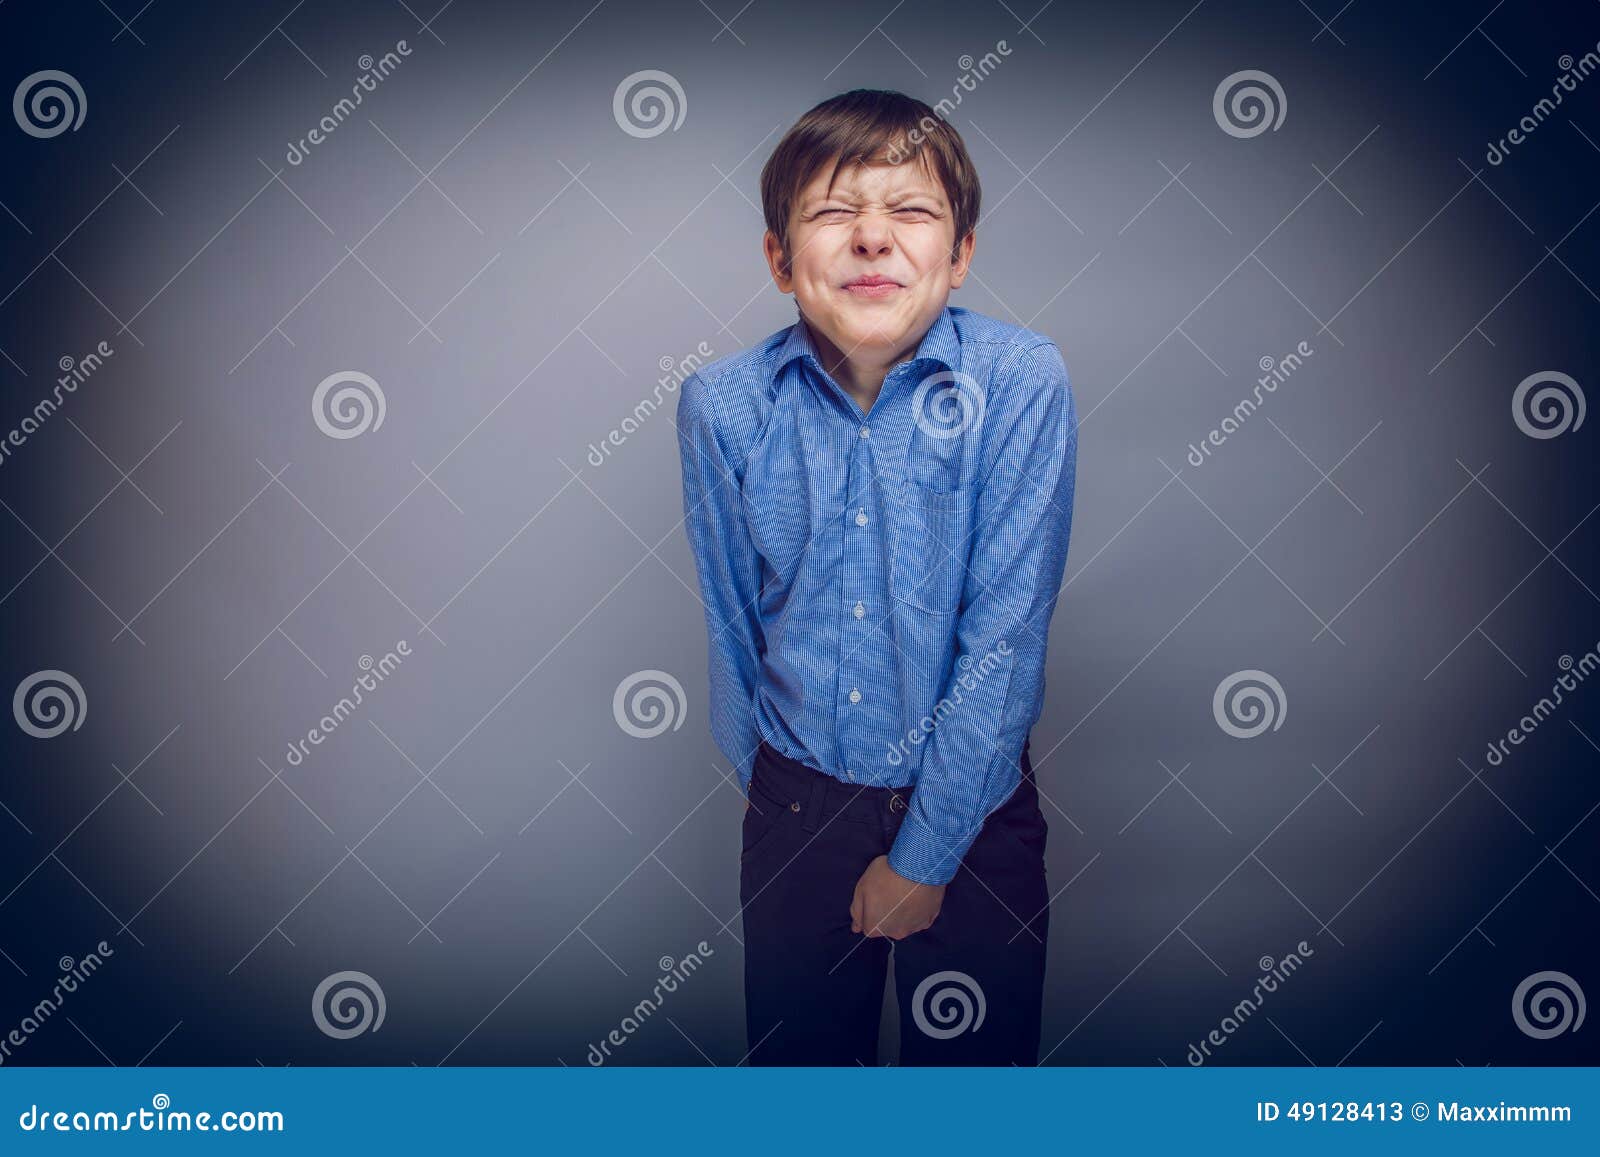 Teenager Boy 10 Years Of European Appearance Stock Photo 